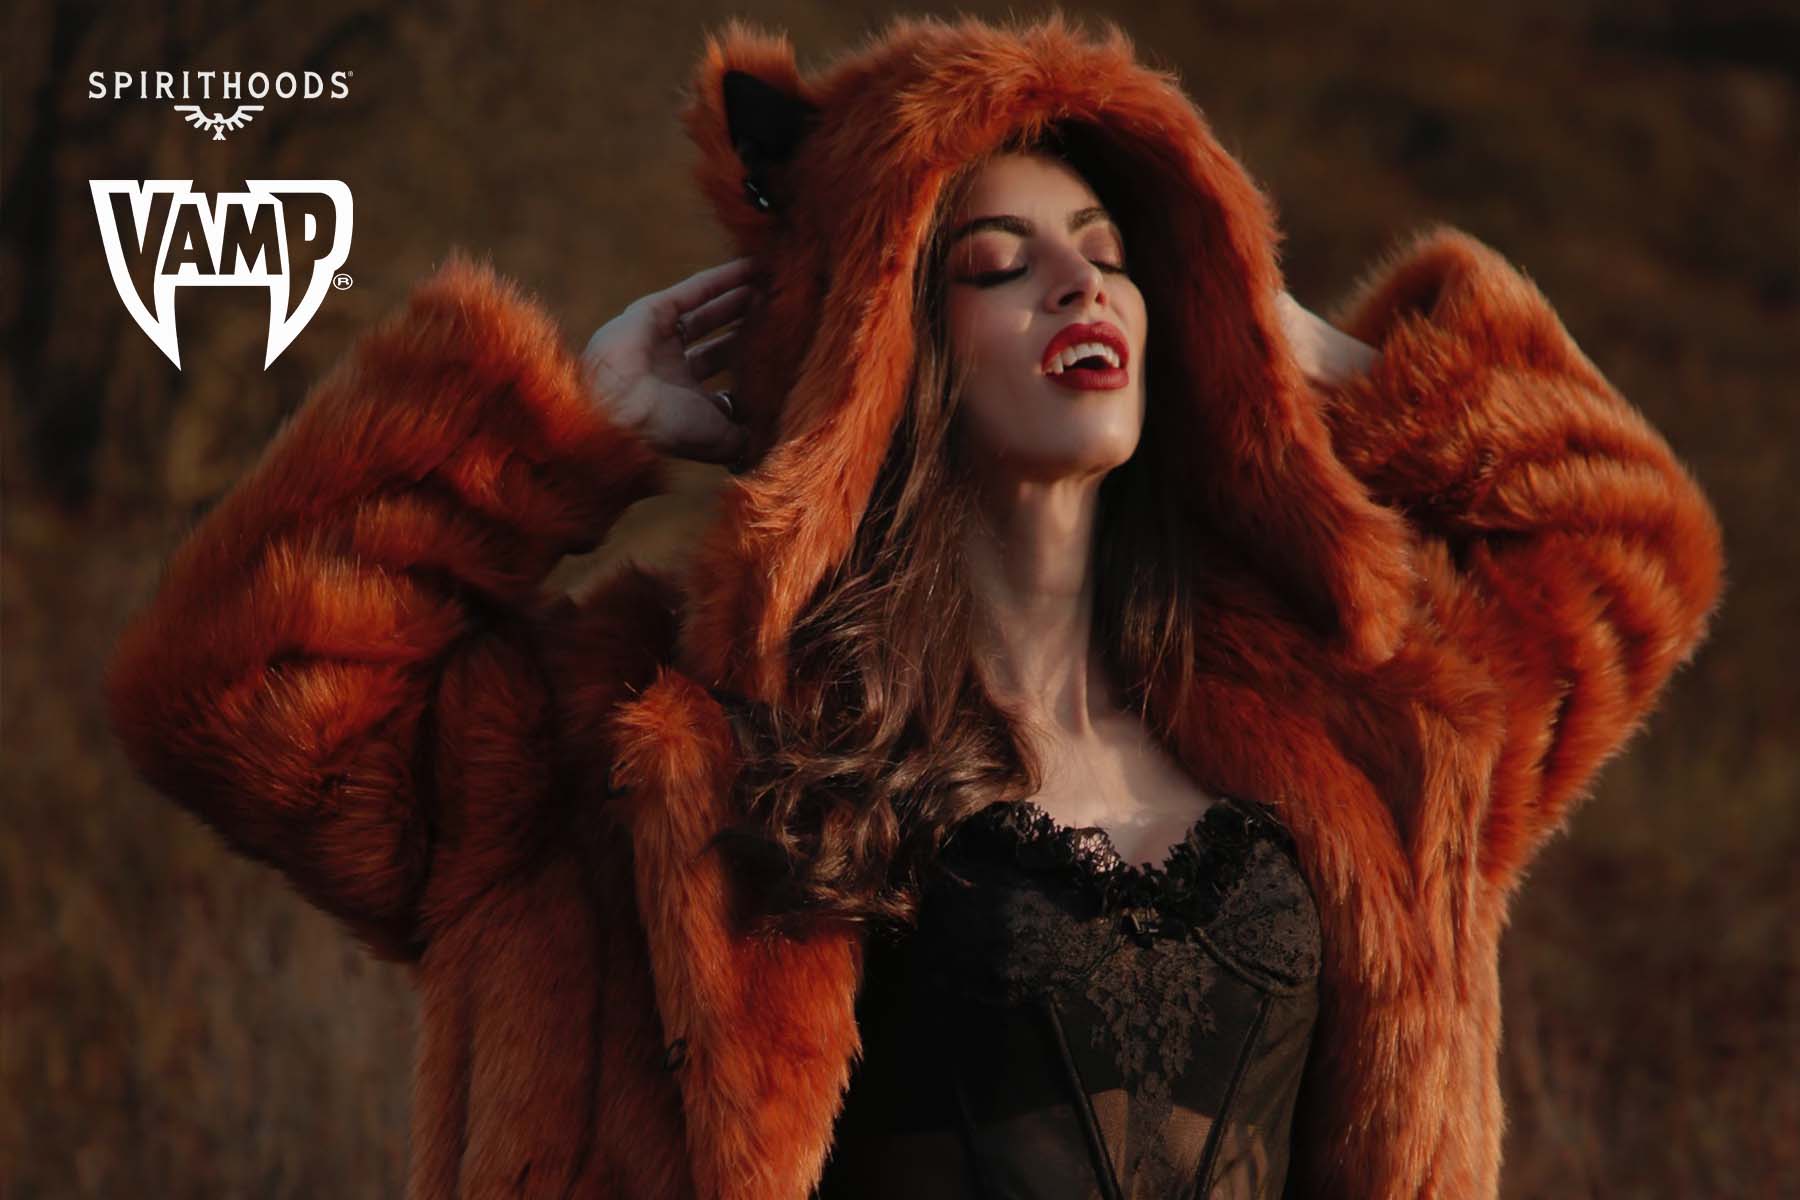 NEW VAMP Wolf Coat Drops October 21st! Be first to get it!